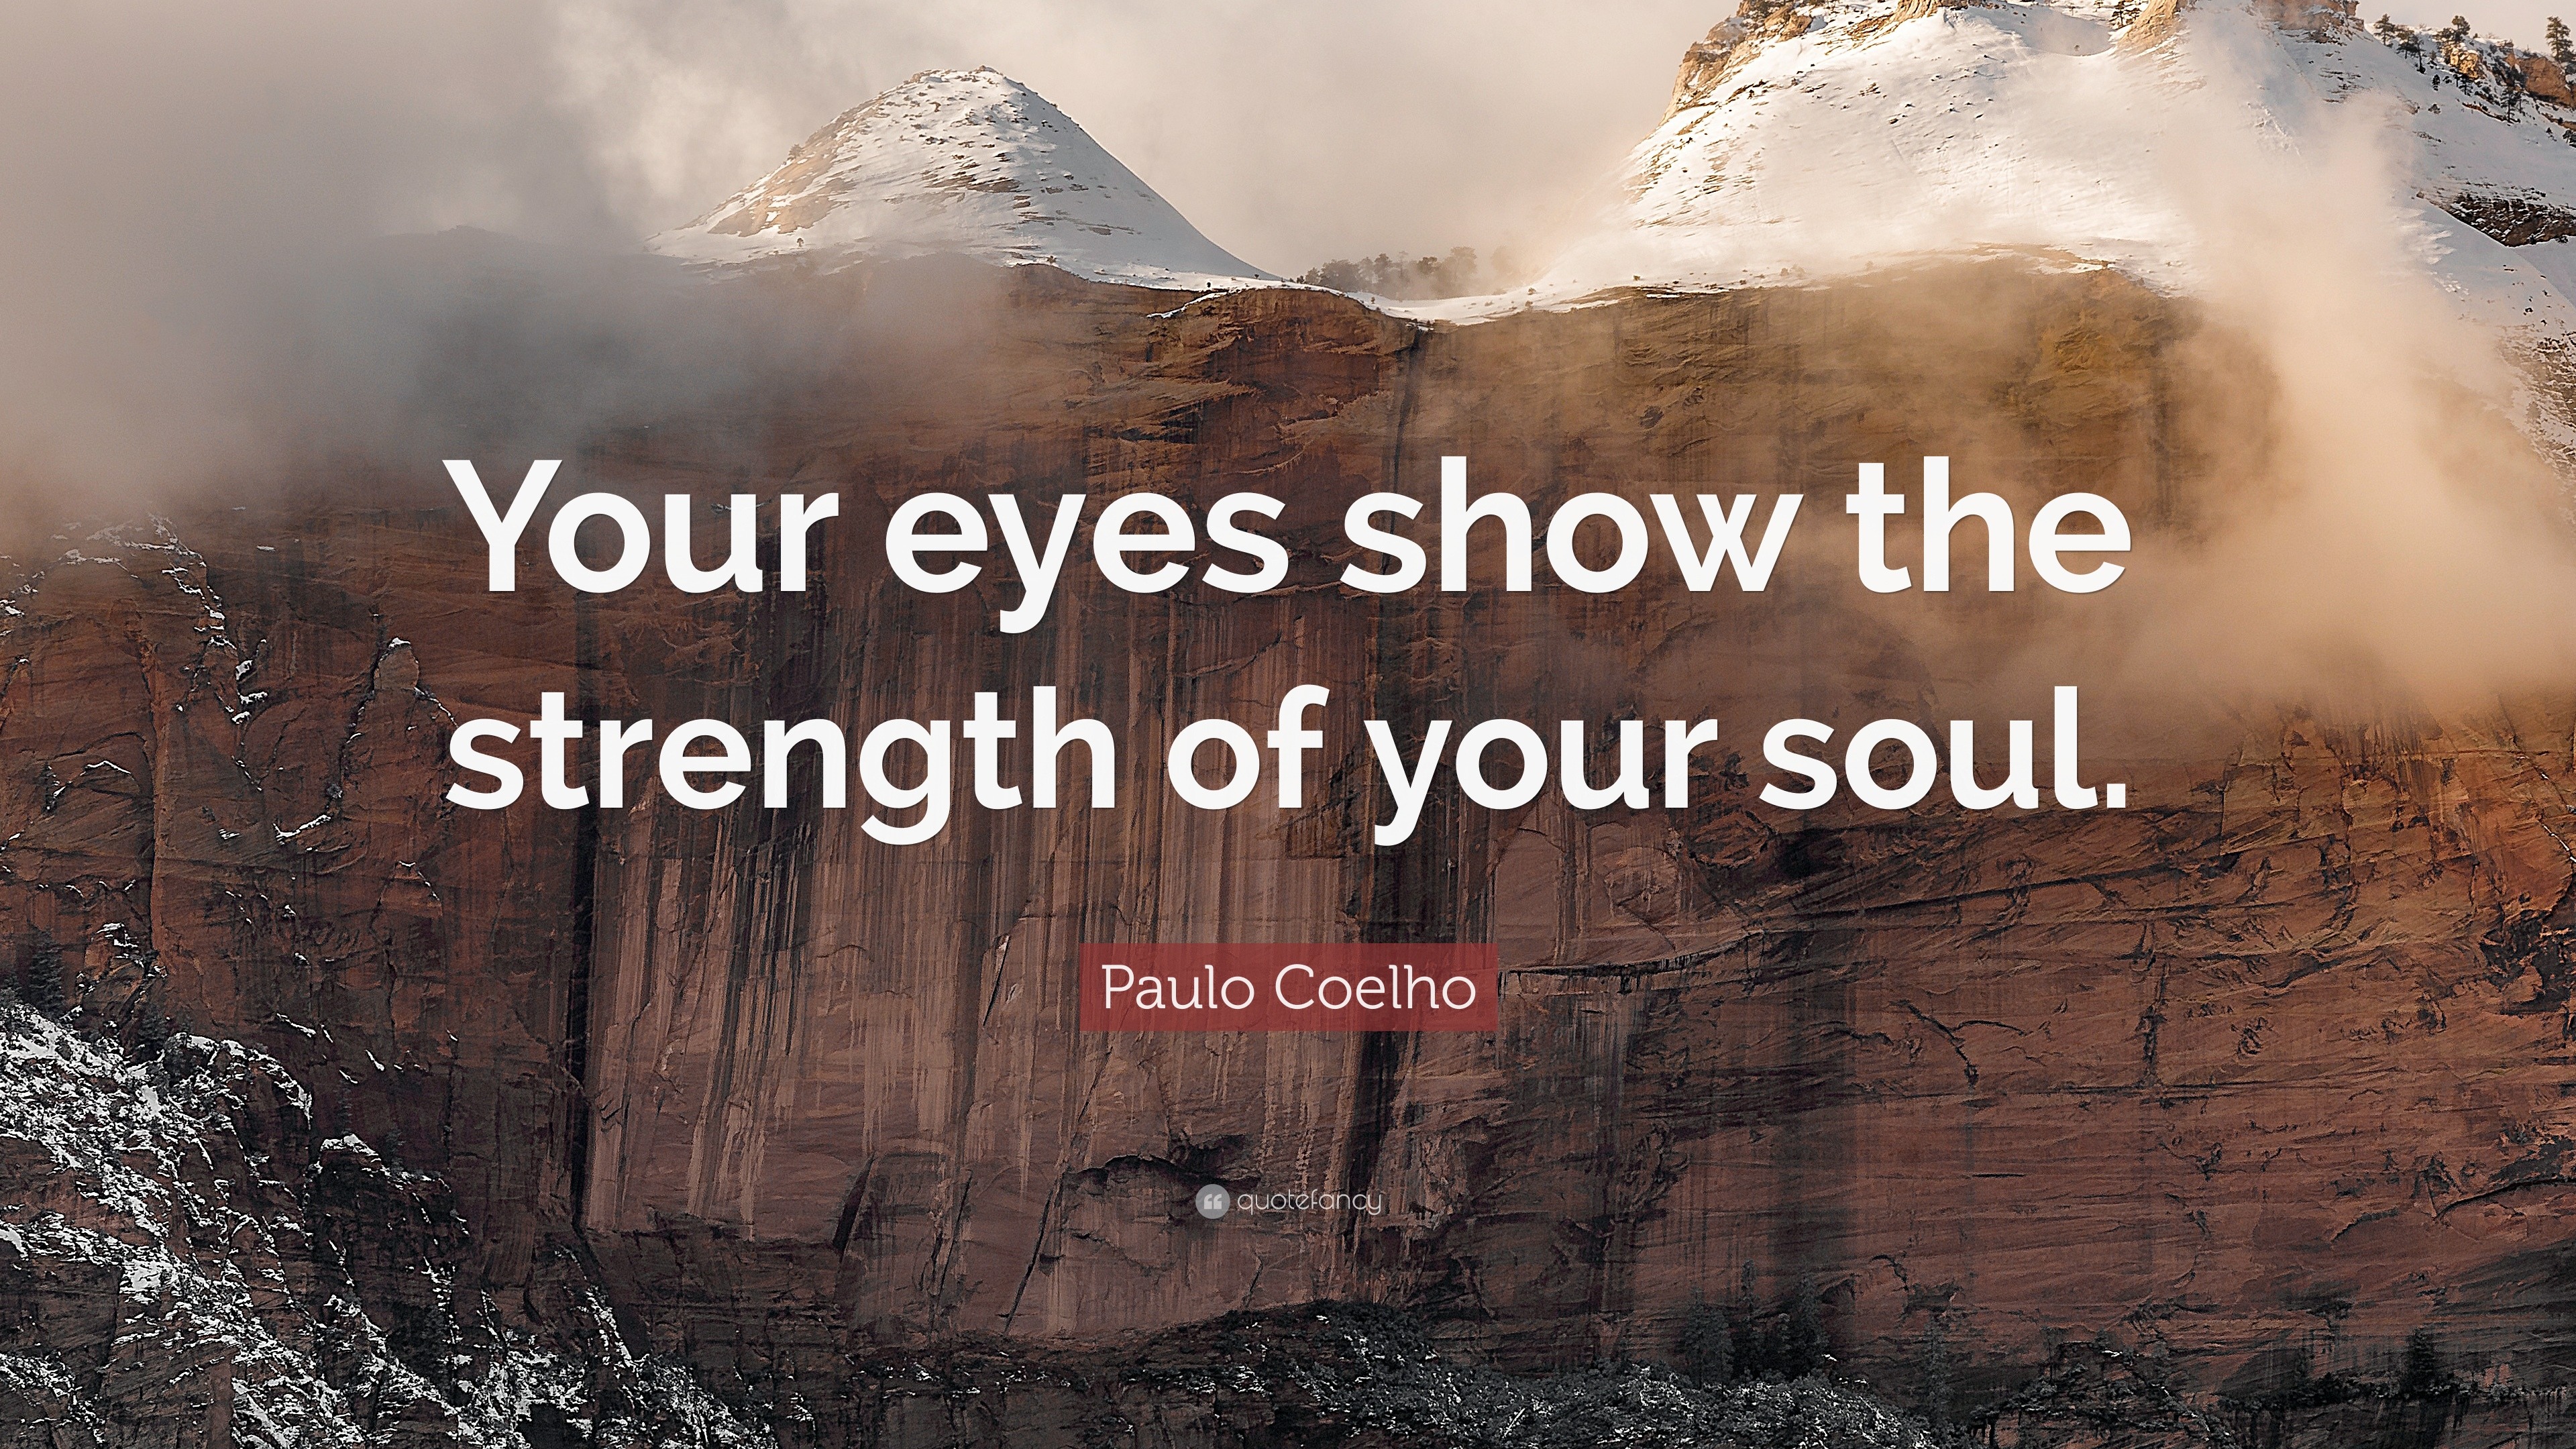 Paulo Coelho Quote Your Eyes Show The Strength Of Your Soul 12 Wallpapers Quotefancy